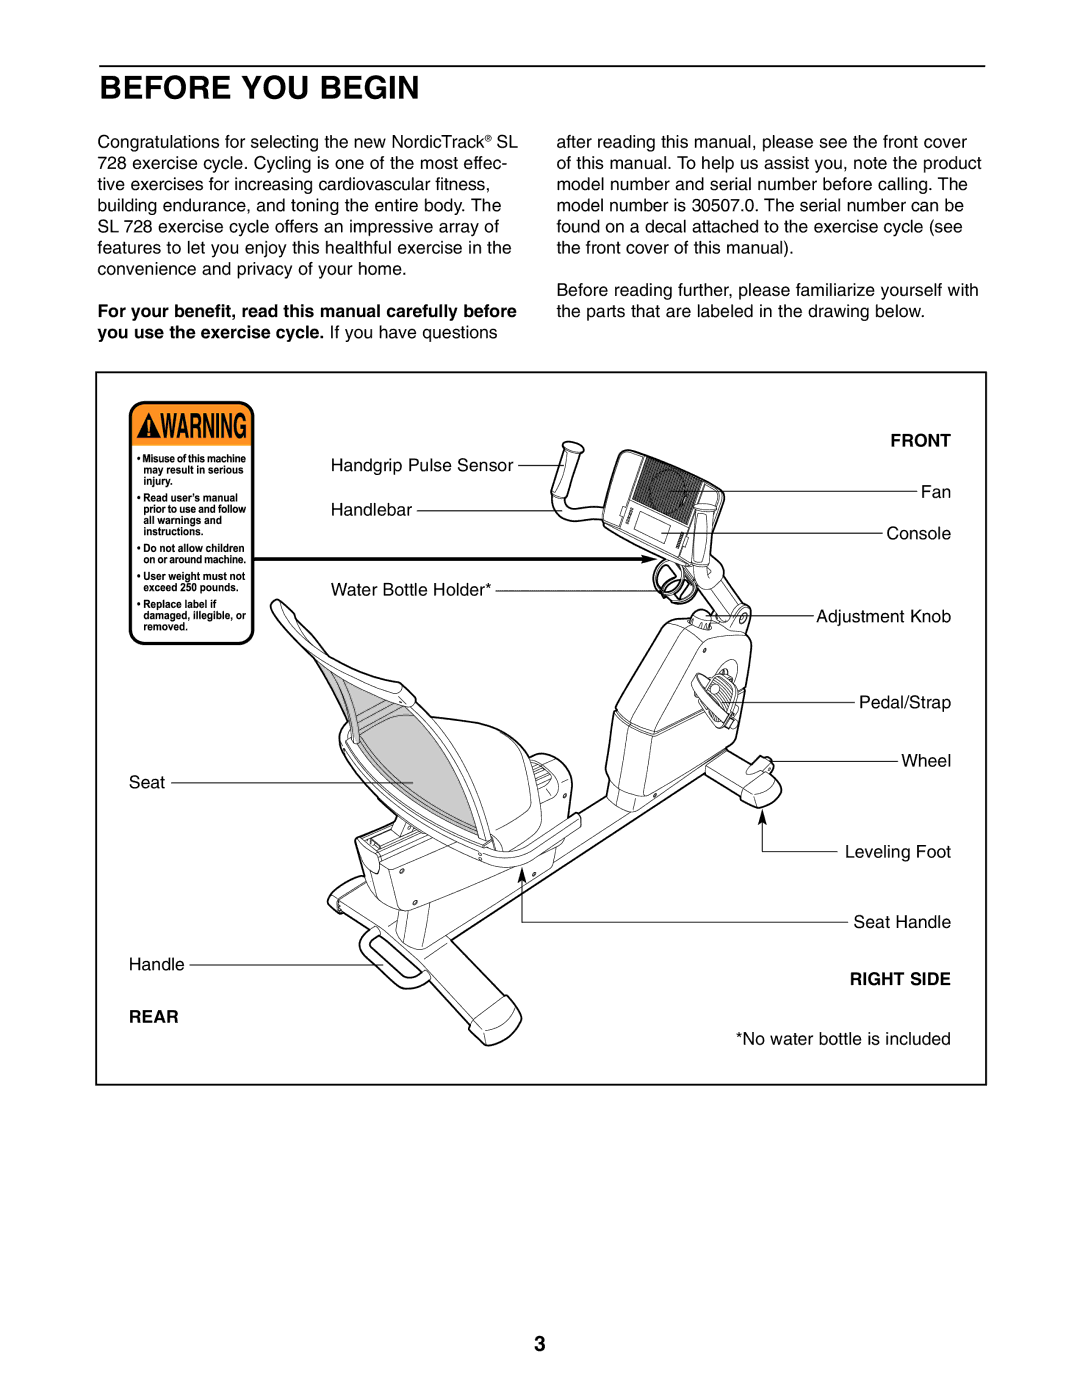 NordicTrack 30507.0 user manual Before YOU Begin, Front, Right Side, Rear 